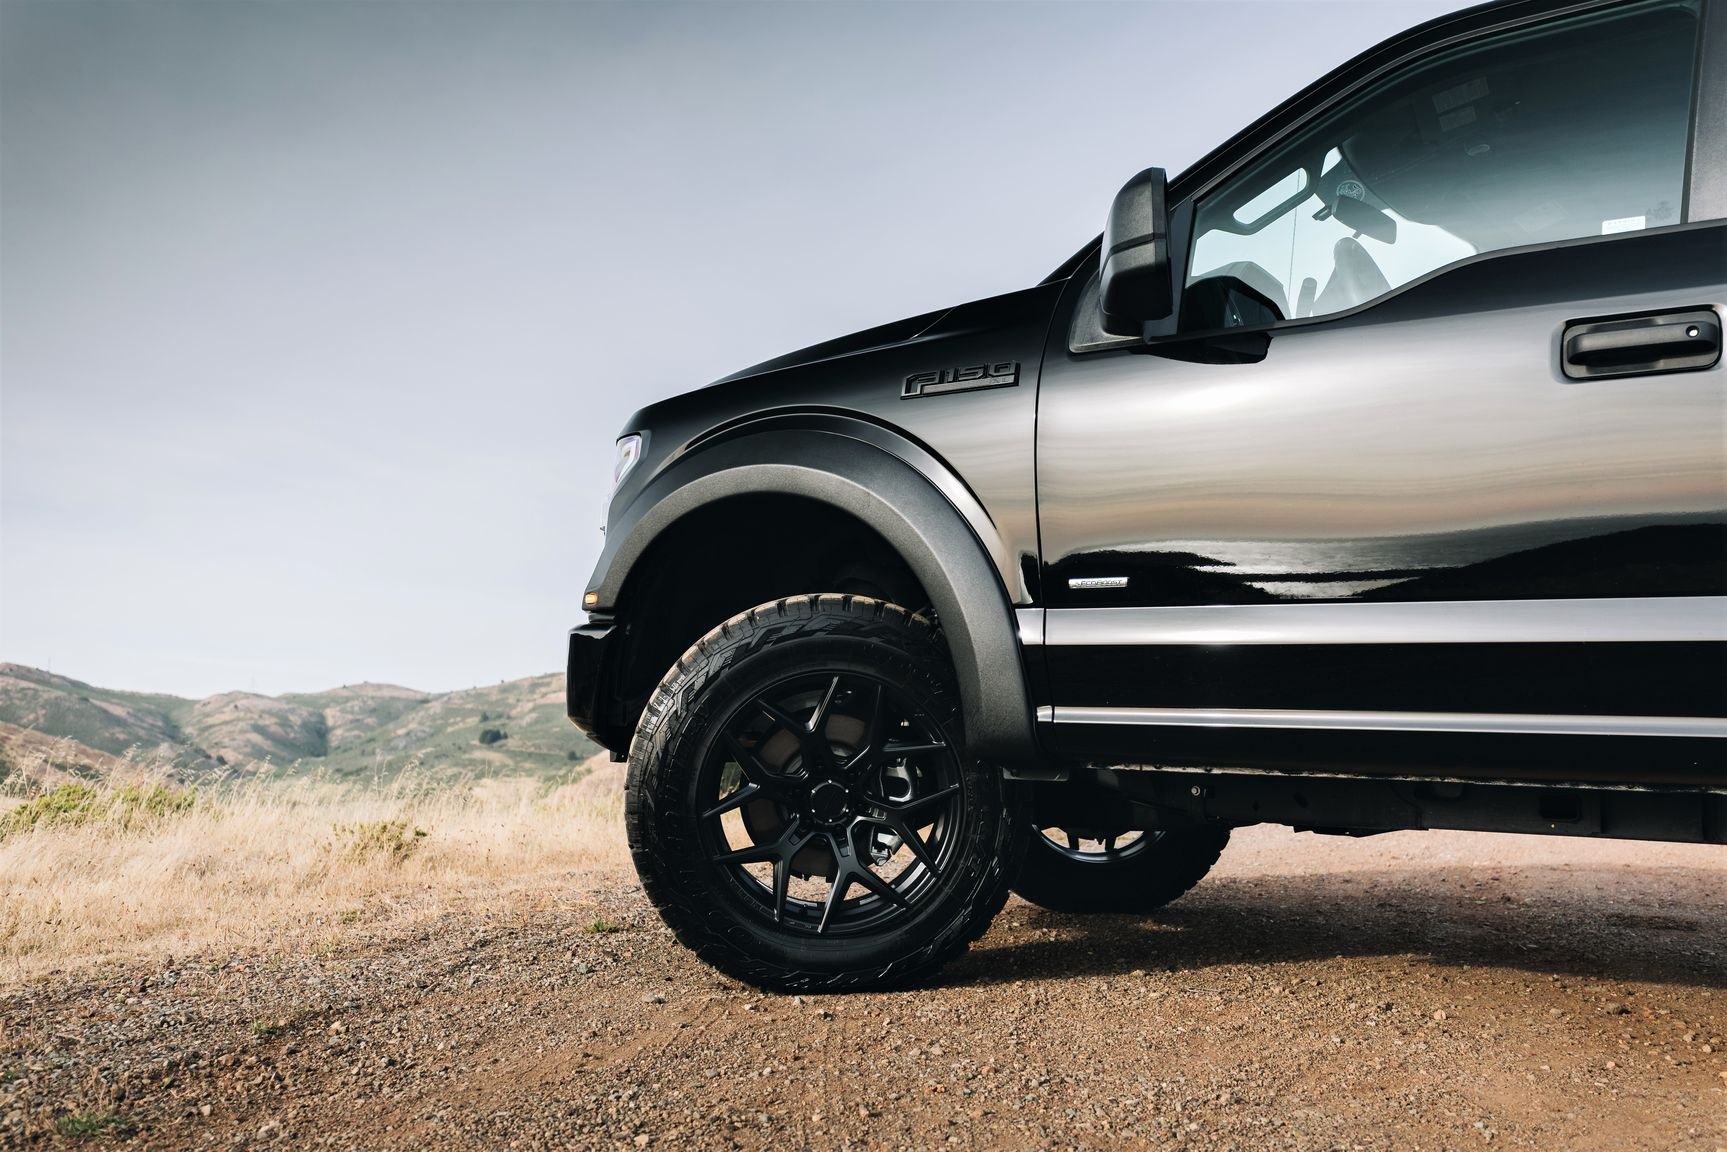 Black Lifted Ford F-150 with Retractable Running Boards - Photo by Venom Rex